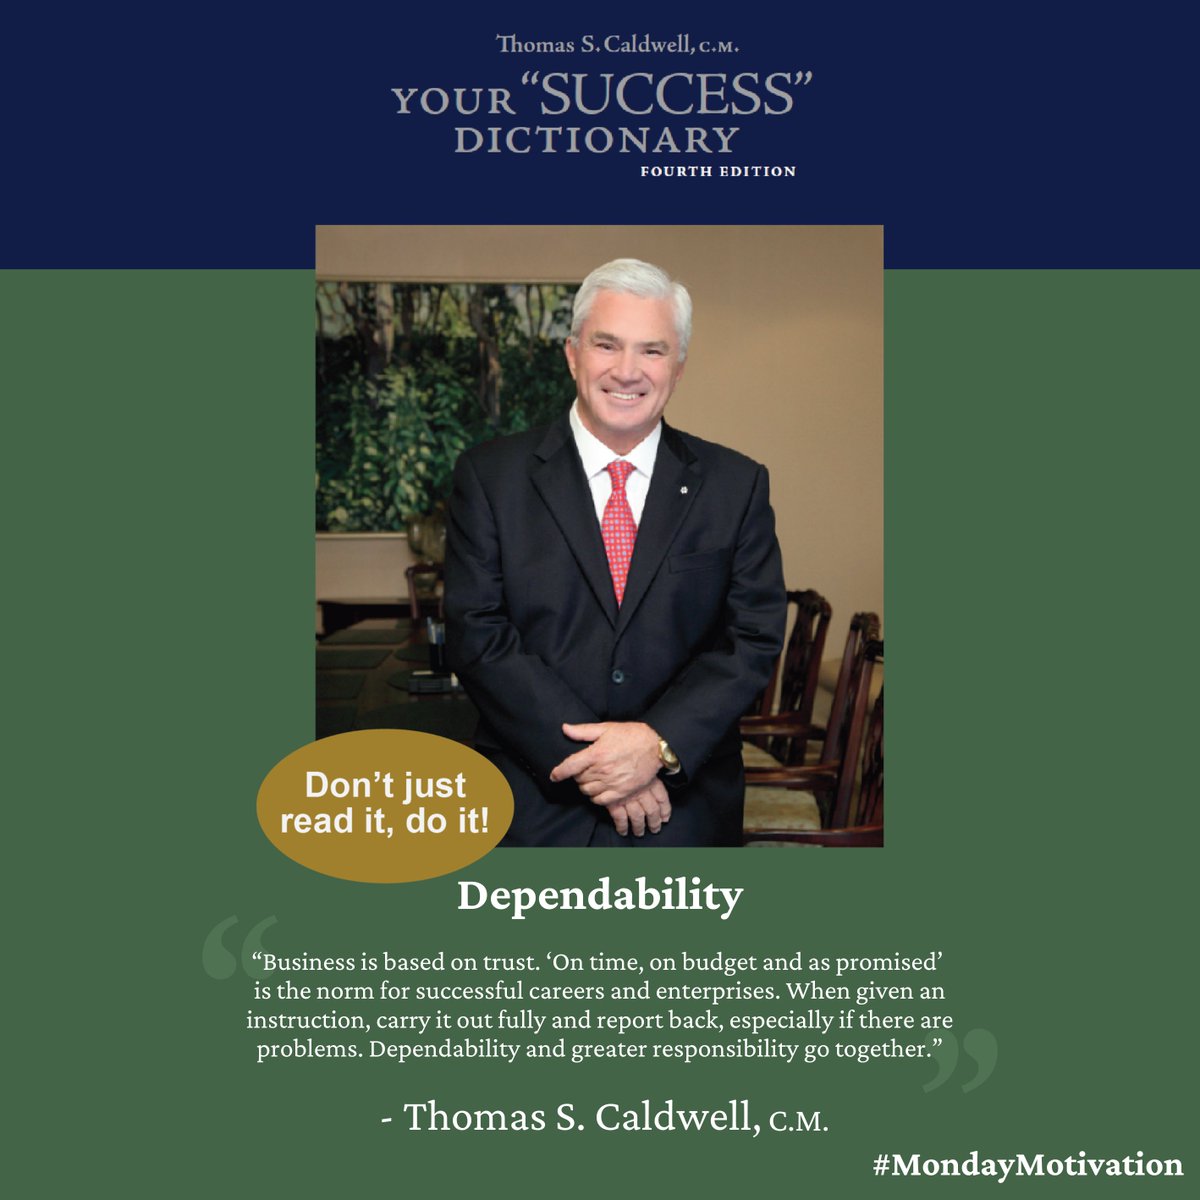 Your #MondayMotivation word of the day – Dependability

#YourSuccessDictionary #ThomasSCaldwell #Monday #Motivation #Success #SuccessDictionary